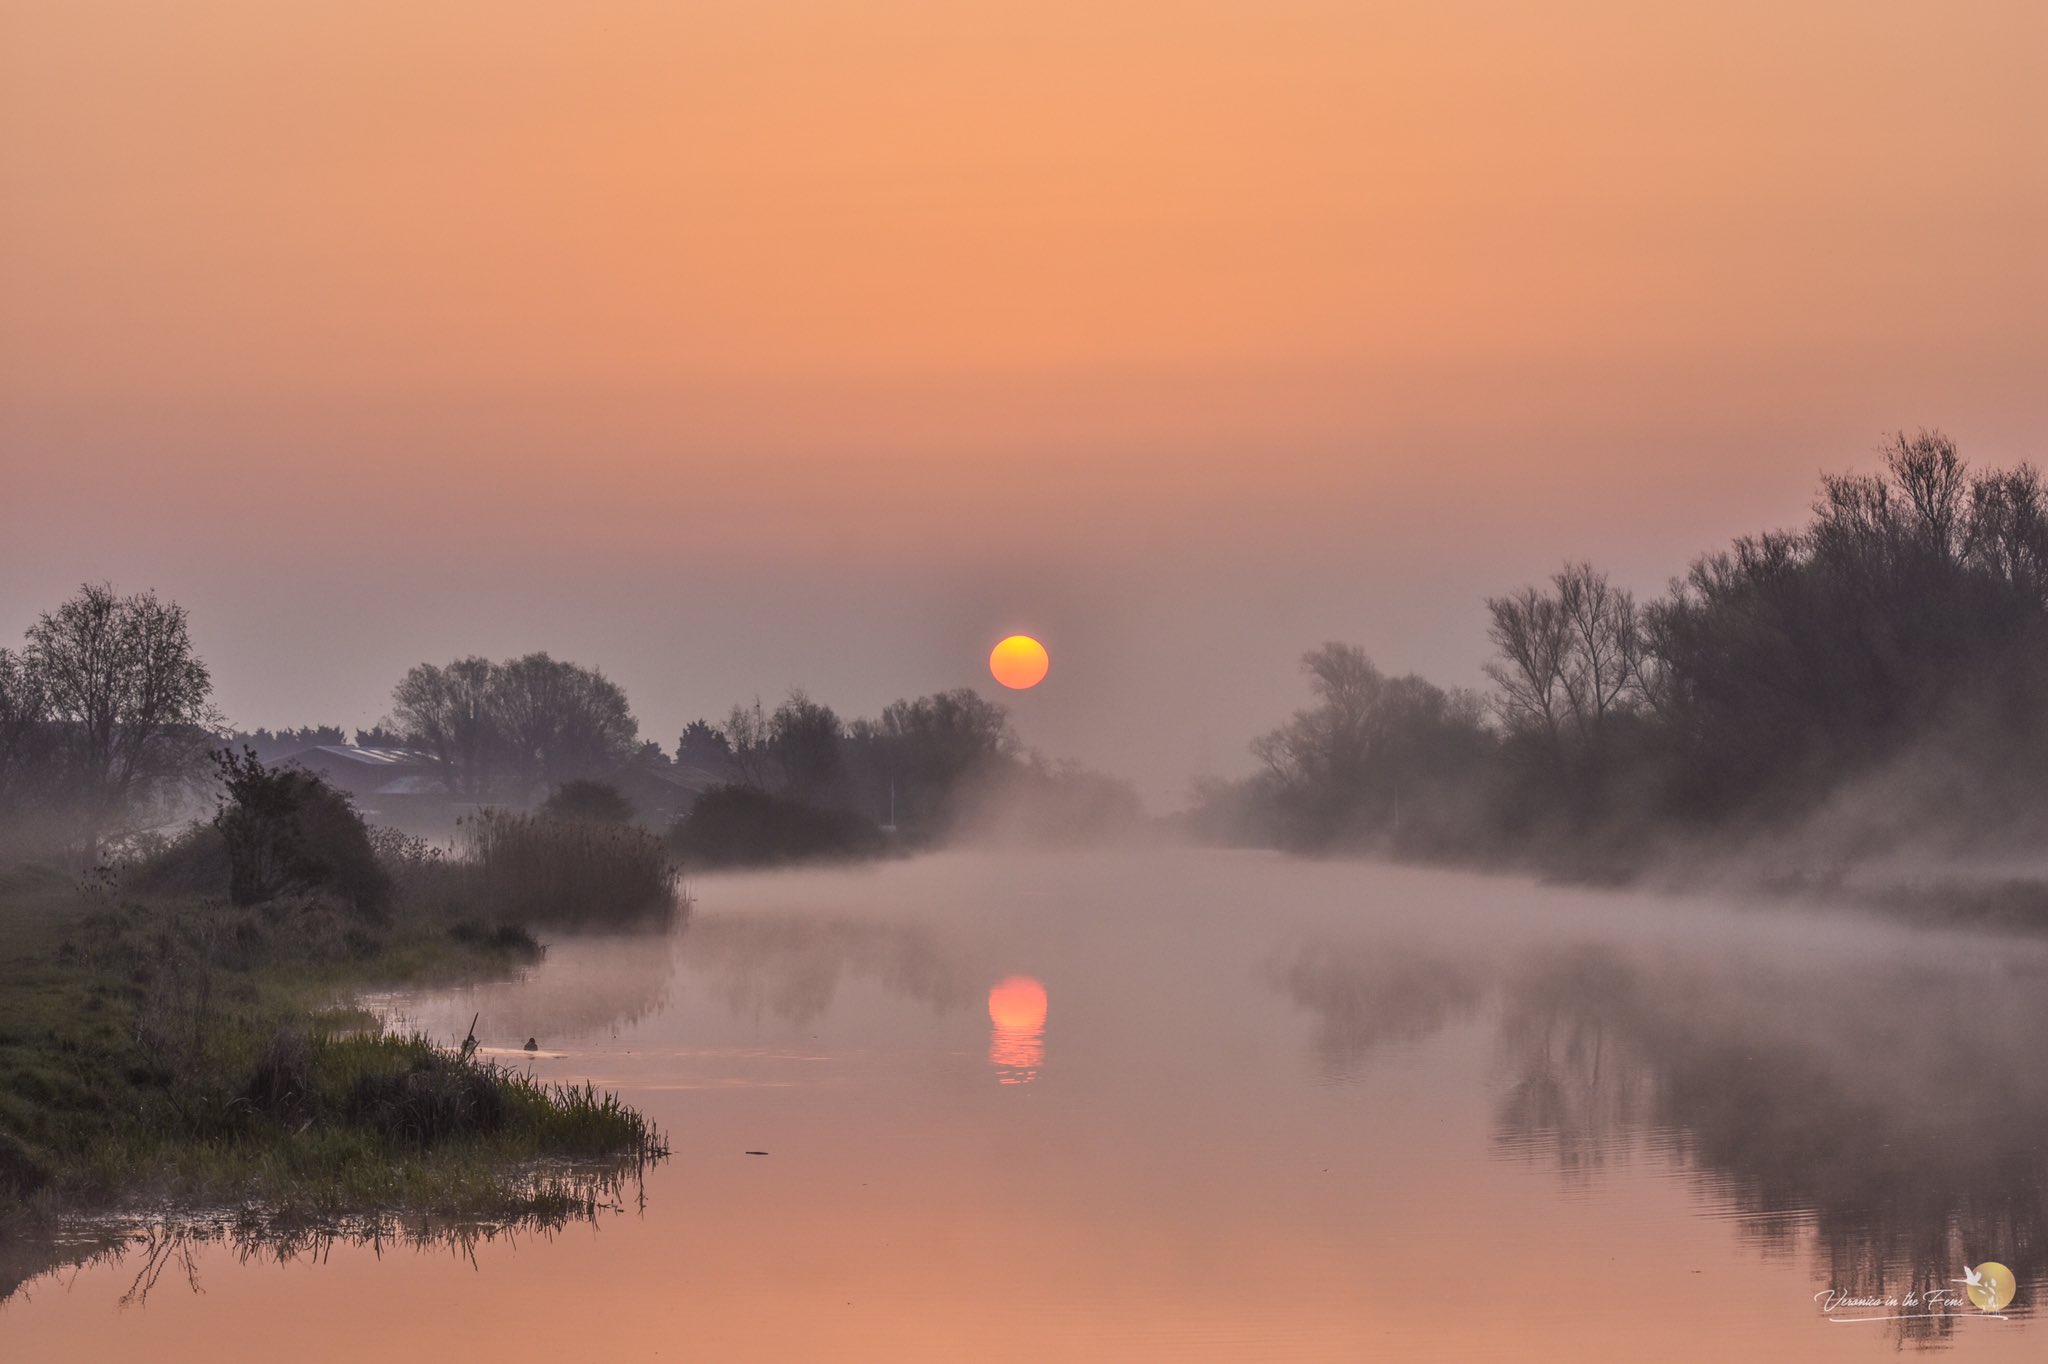 1st Place Sunrise in the Fens, Ely, Cambridgeshire by Veronica in the Fens @VeronicaJoPo